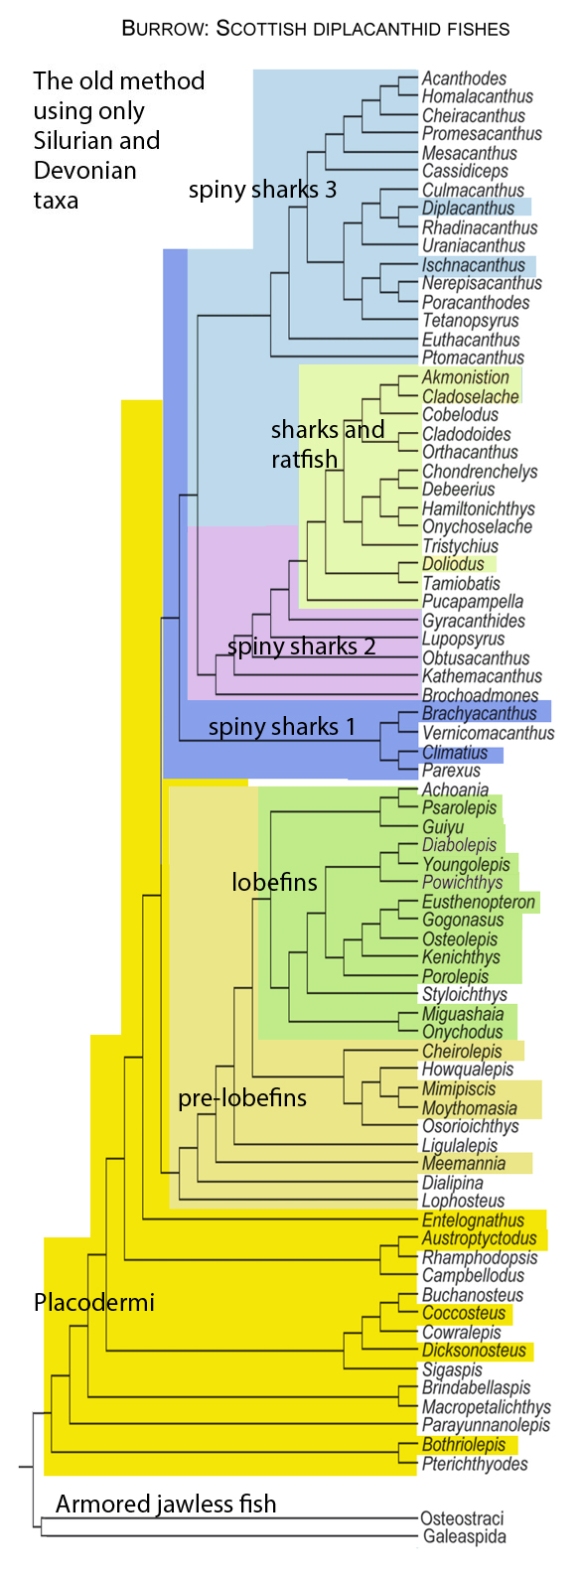 Figure 1. Cladogram from Burrow et al. 2016 (colors added here) showing the origin of Acanthodii from Placodermi using only Silurian and Devonian taxa. Compare to figure 3.